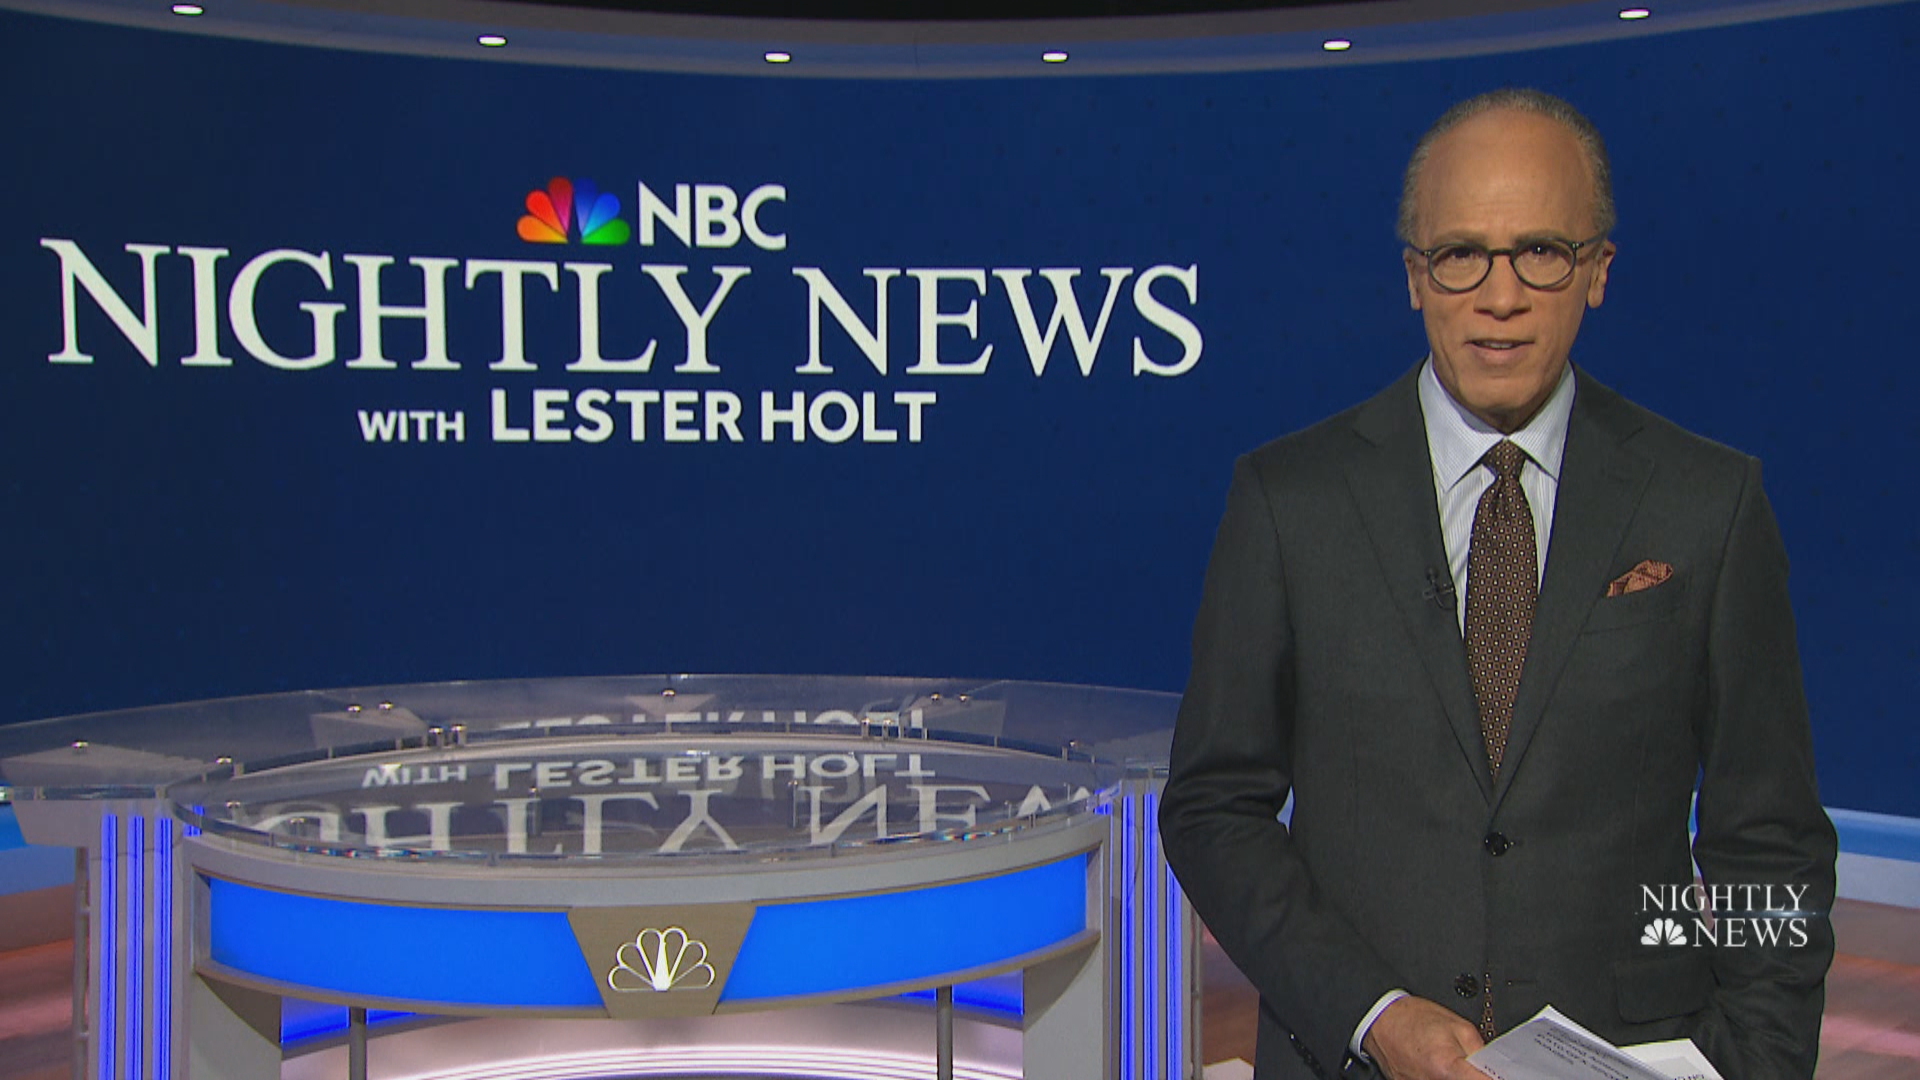 Nightly News with Lester Holt: The Latest News Stories Every Night - NBC  News | NBC News